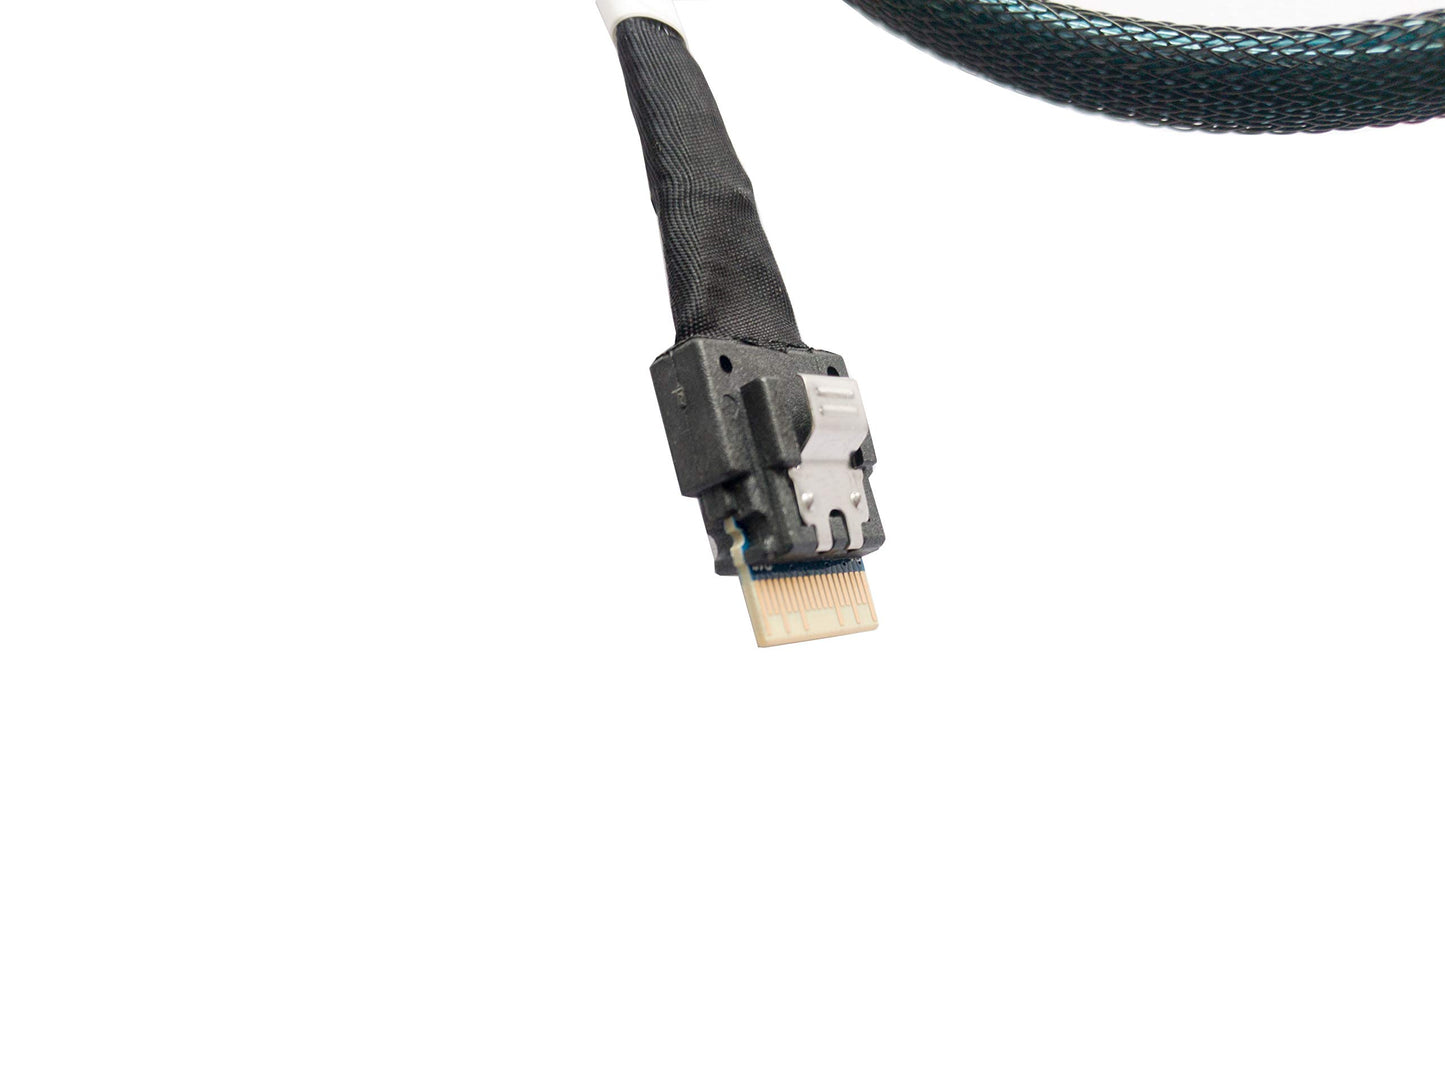 DiliVing SlimSAS 4X to MiniSAS HD 4X,SFF-8654 38pin to SFF-8643 36pin Cable 